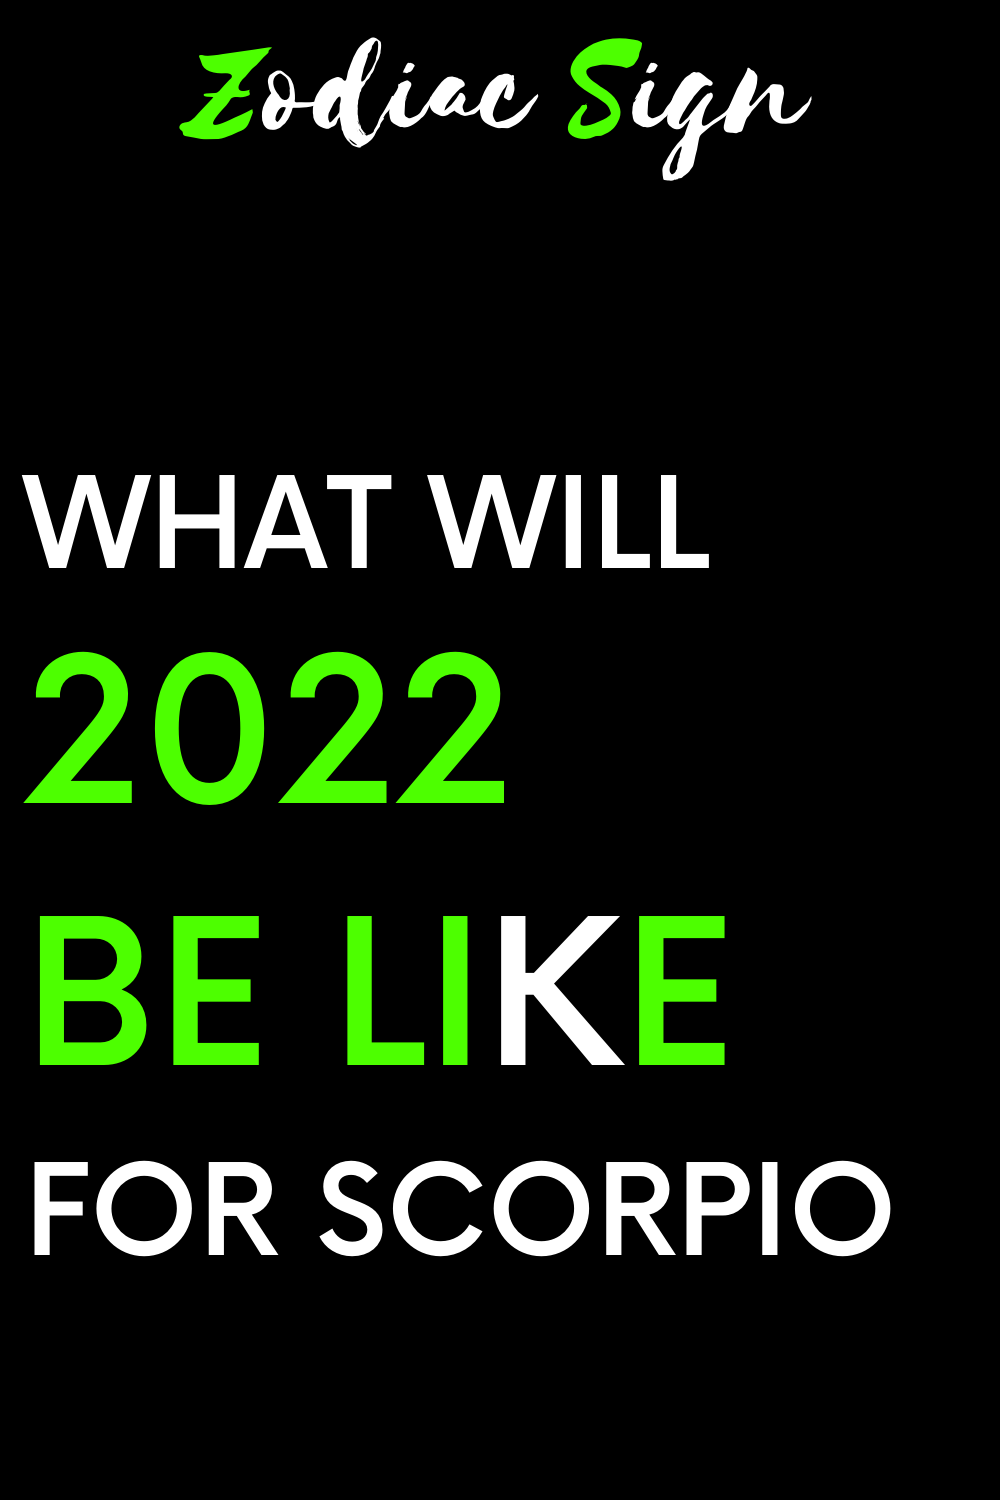 What will 2022 be like for Scorpio